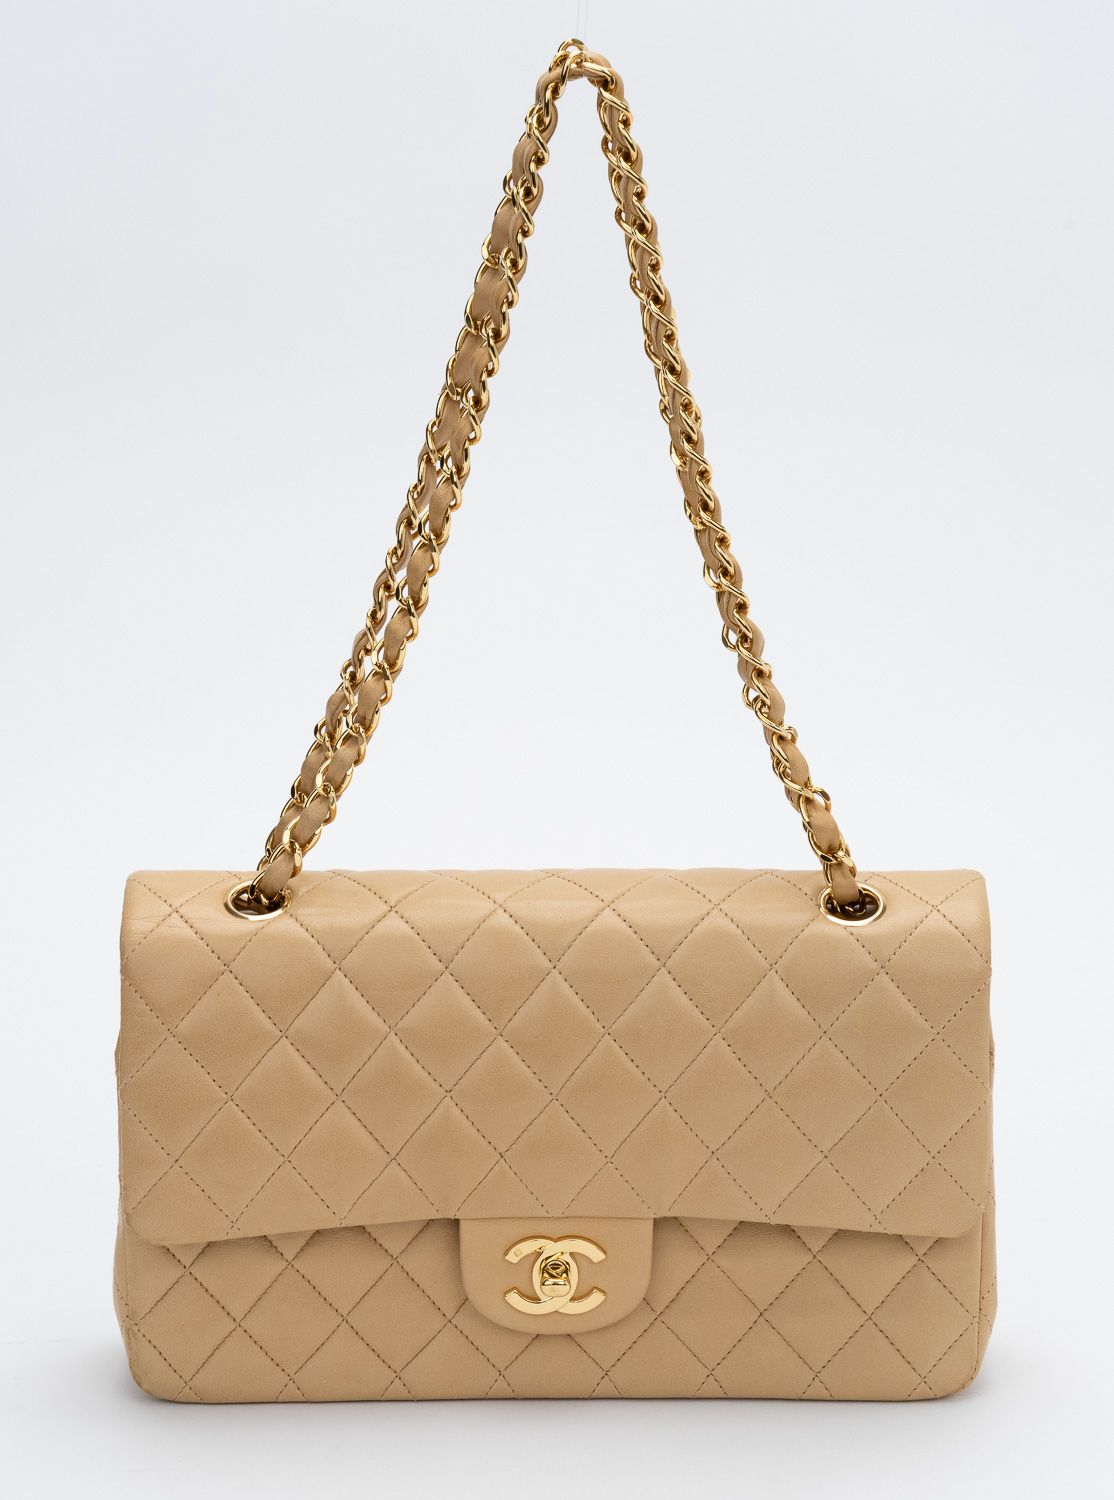 Super rare Chanel classic flap beige size 10, Gallery posted by Livia.nvt